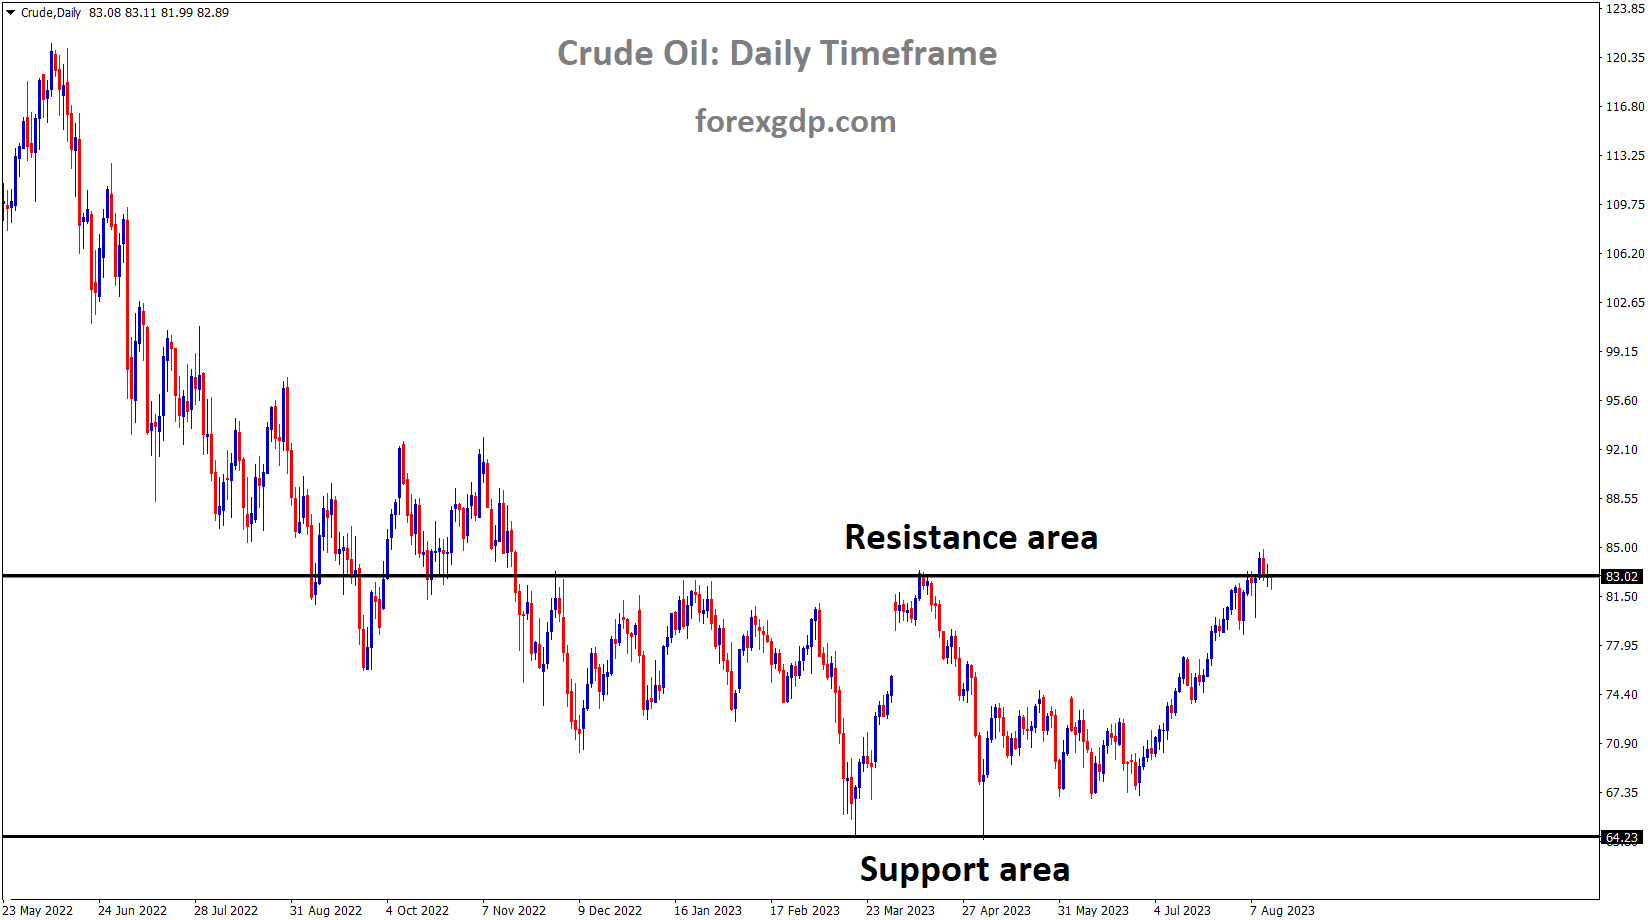 Crude Oil Price is moving in the Box pattern and the market has reached the resistance area of the pattern